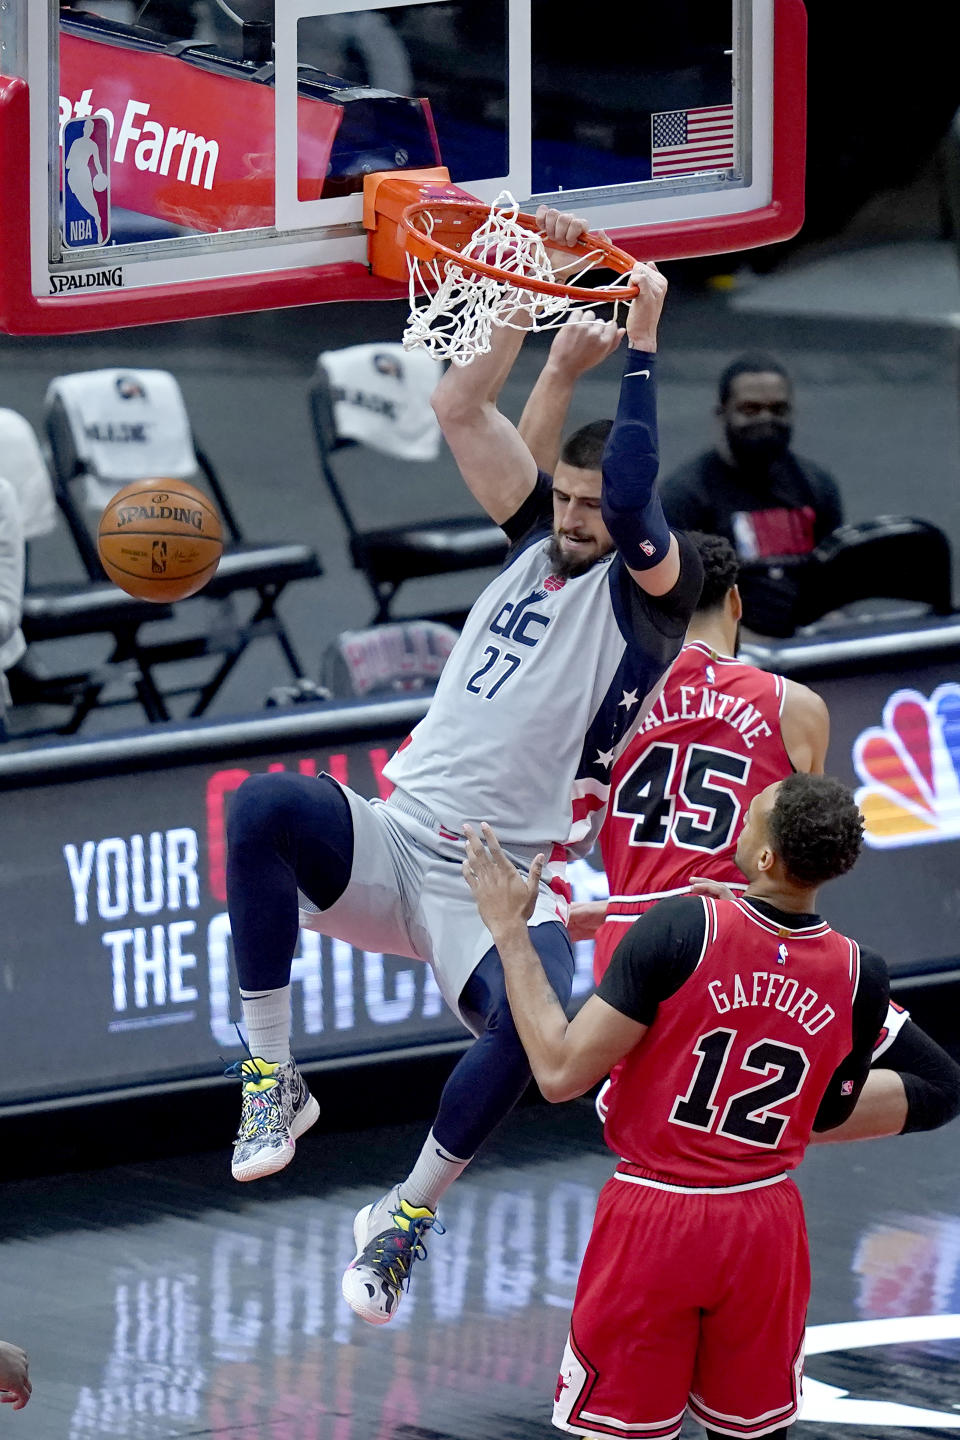 Washington Wizards' Alex Len dunks the ball past Chicago Bulls' Denzel Valentine (45) as Daniel Gafford watches during the first half of an NBA basketball game Monday, Feb. 8, 2021, in Chicago. (AP Photo/Charles Rex Arbogast)